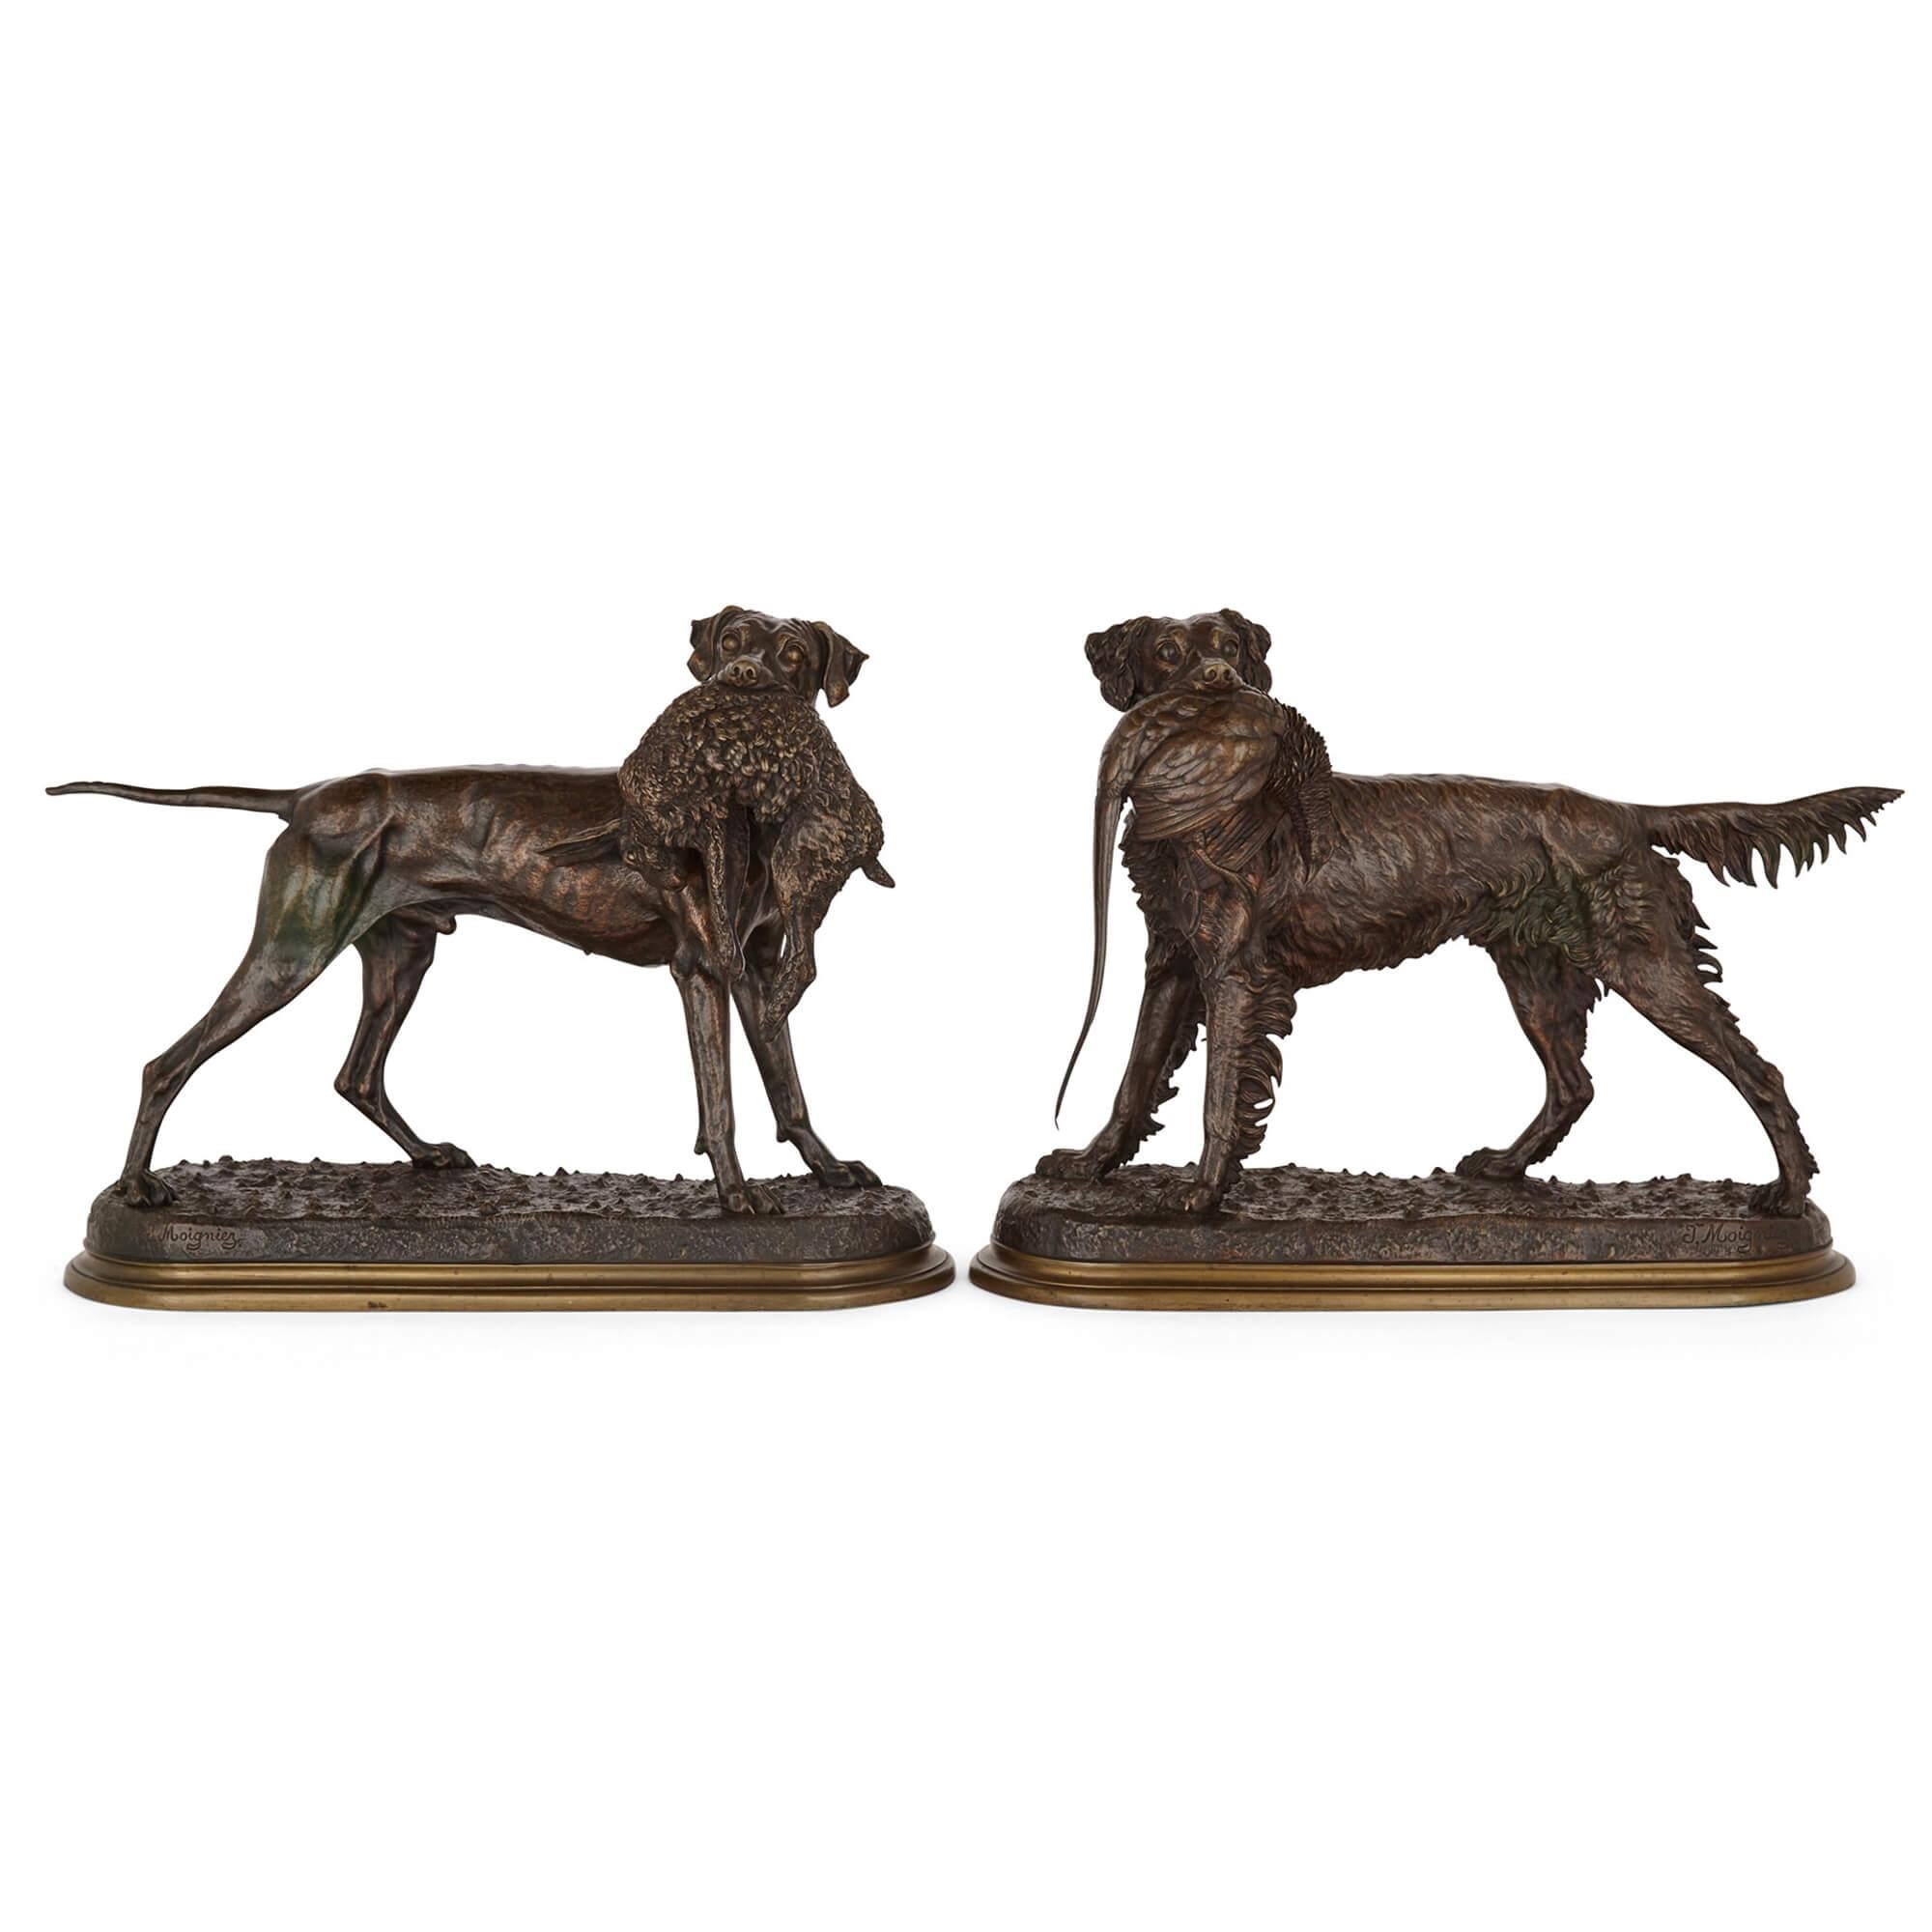 Pair of large patinated bronze hunting dog models by Moigniez
French, late 19th century
Measures: height 43cm, width 58cm, depth 21cm

Made in the late nineteenth century by the fine and acclaimed maker of animalier sculptures Jules Moigniez,